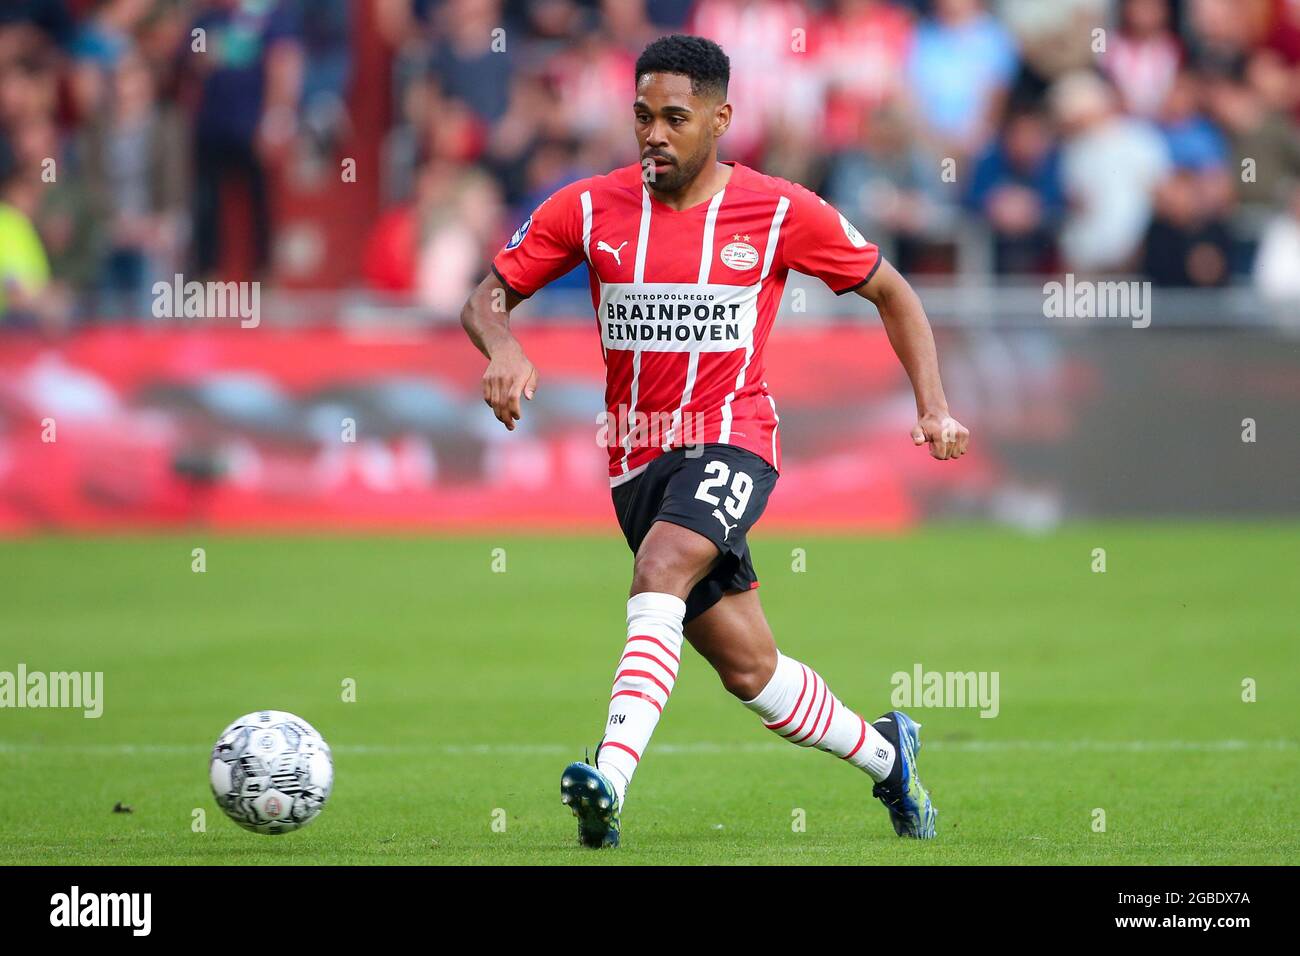 EINDHOVEN, NETHERLANDS - AUGUST 3: Philipp Mwene of PSV Eindhoven during  the UEFA Champions League - Third qualifying round match between PSV and FC  Midtjylland at Philips Stadium on August 3, 2021